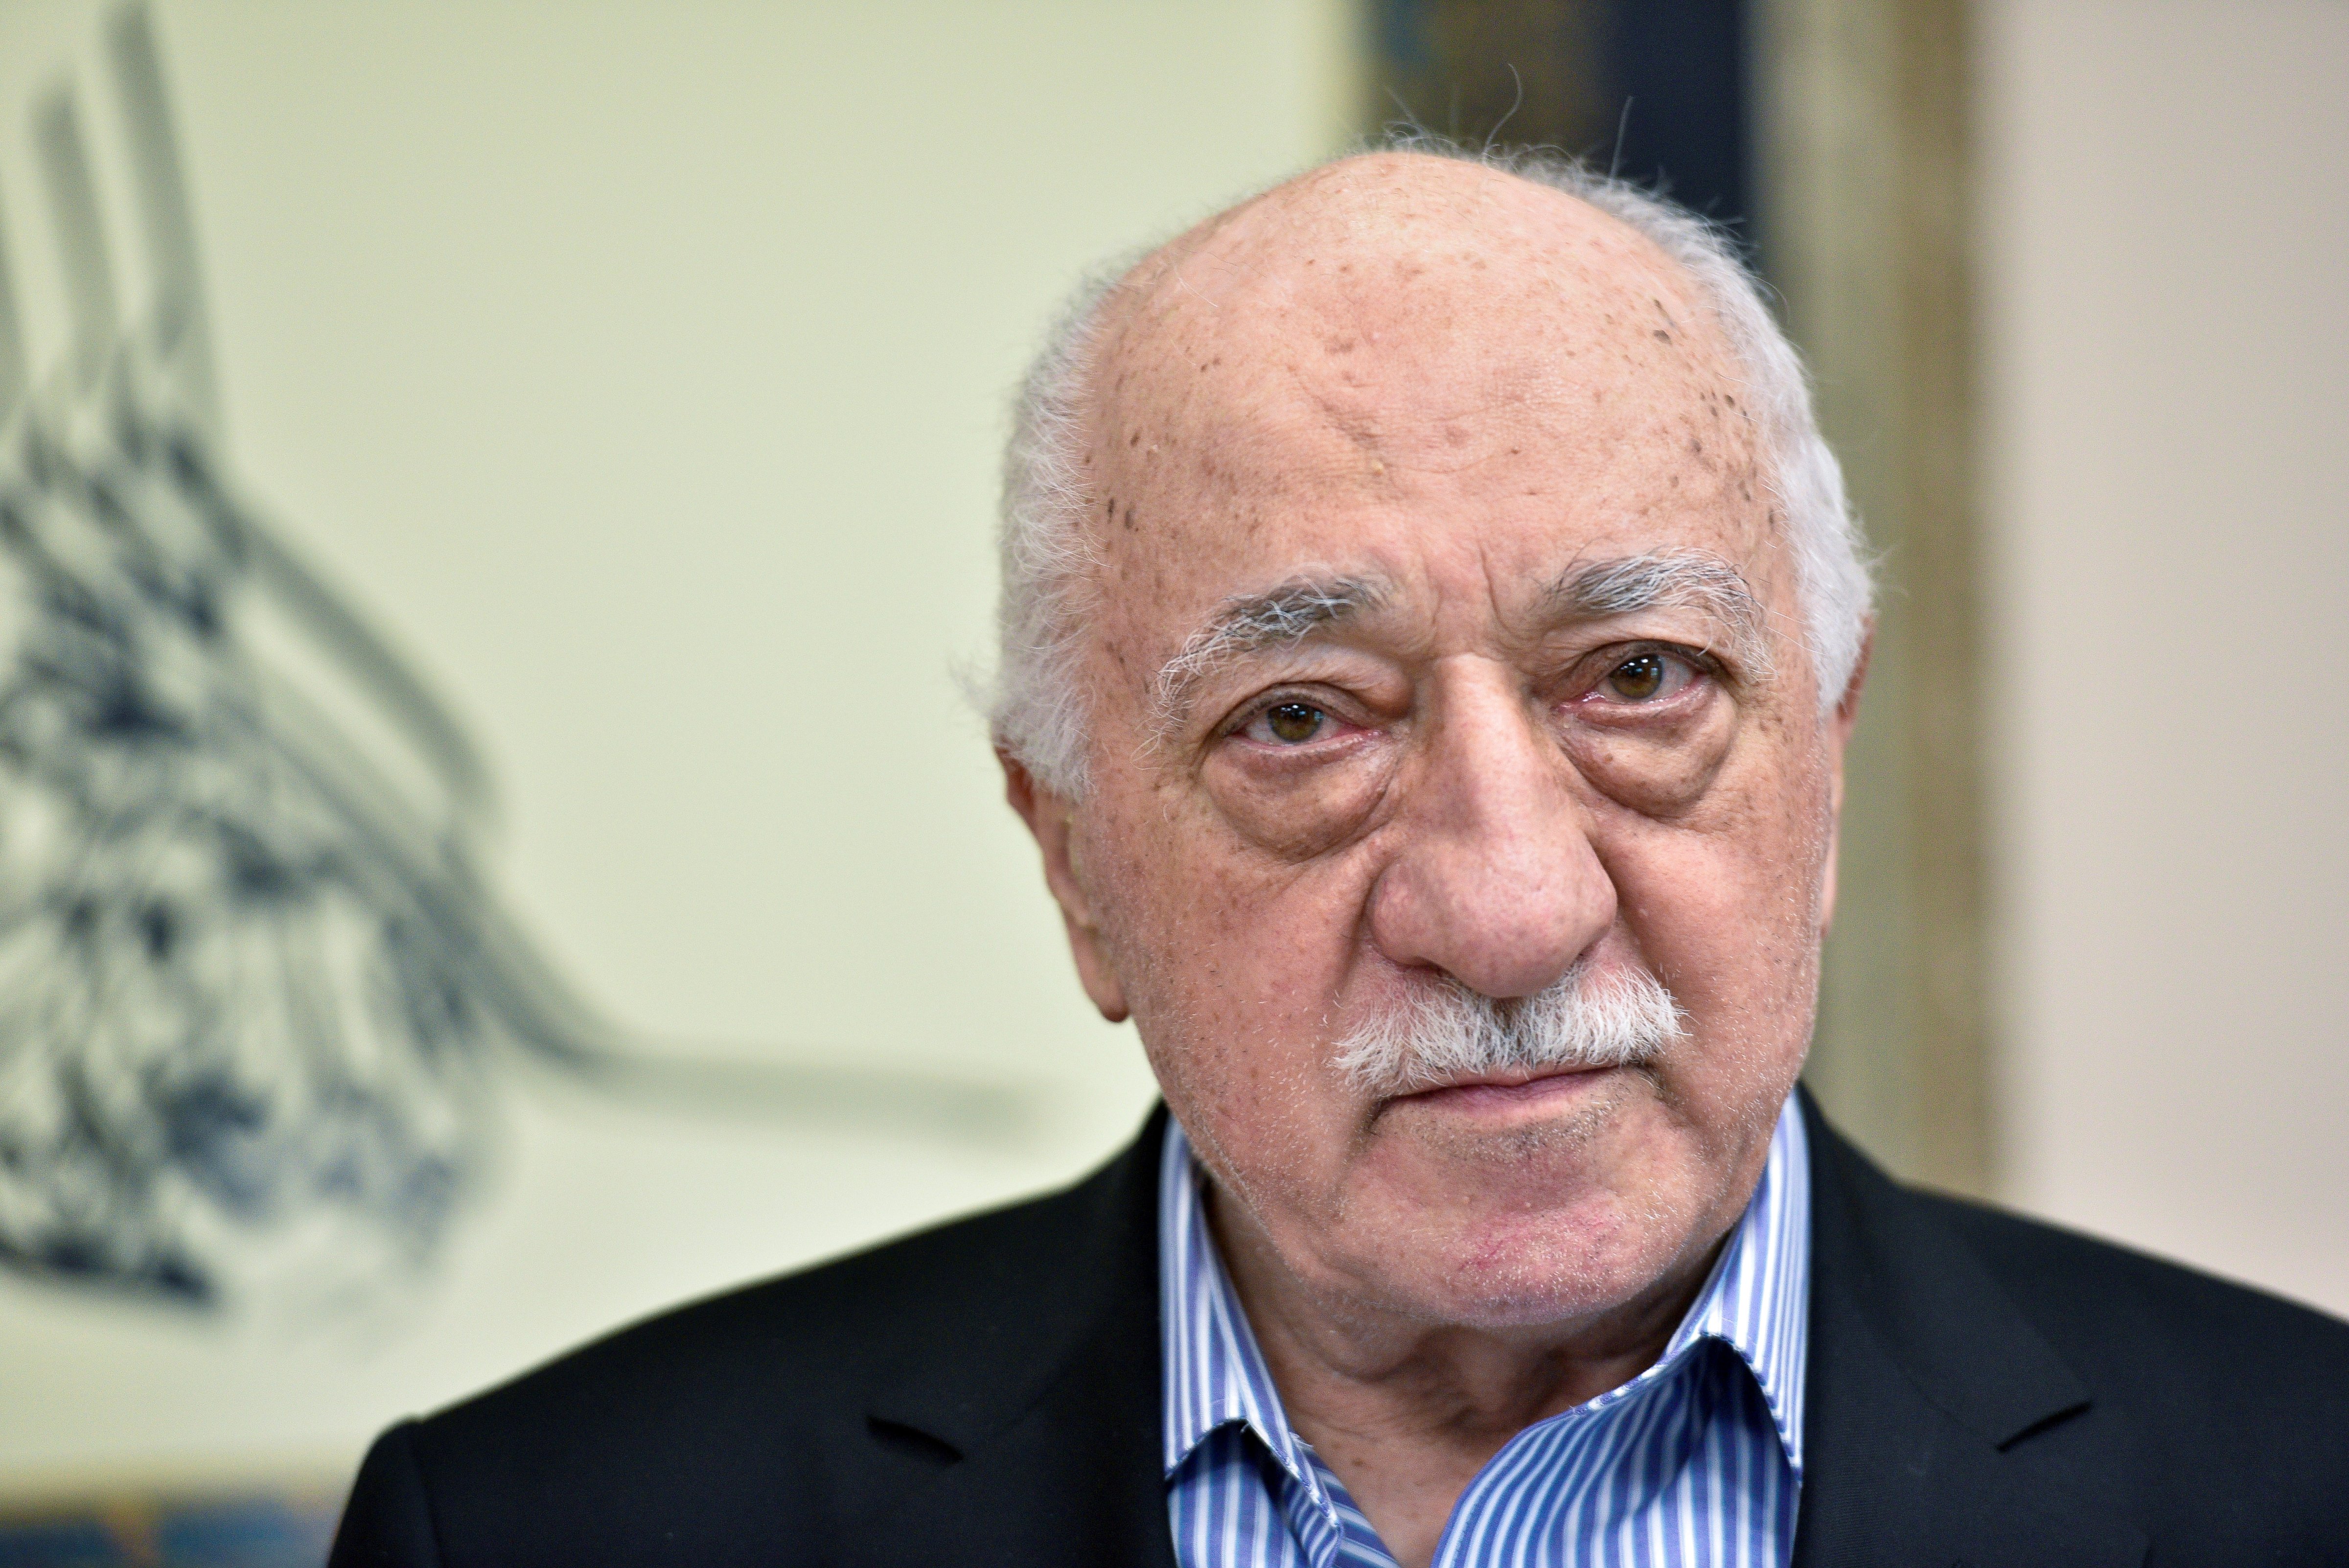 U.S.-based cleric Fethullah Gulen at his home in Saylorsburg, Pa., on July 29, 2016 (Charles Mostoller—Reuters)